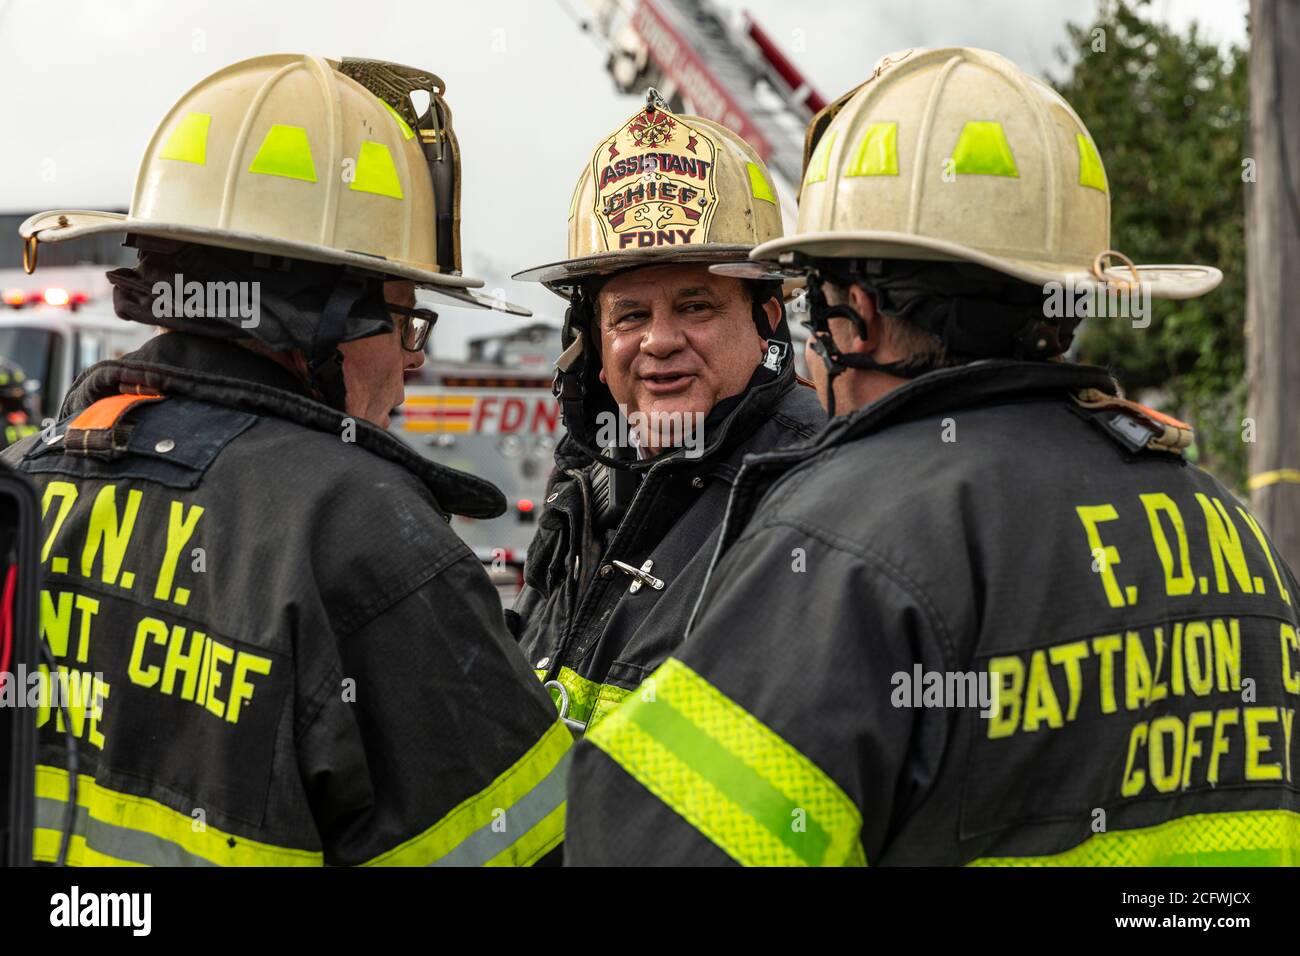 New York, NY - September 7, 2020: Bureau of Operations Assistant Chief Richard Blatus seen where firefighters battle massive salvage yard 4 alarm fire in the Bronx Hunts Point section Stock Photo